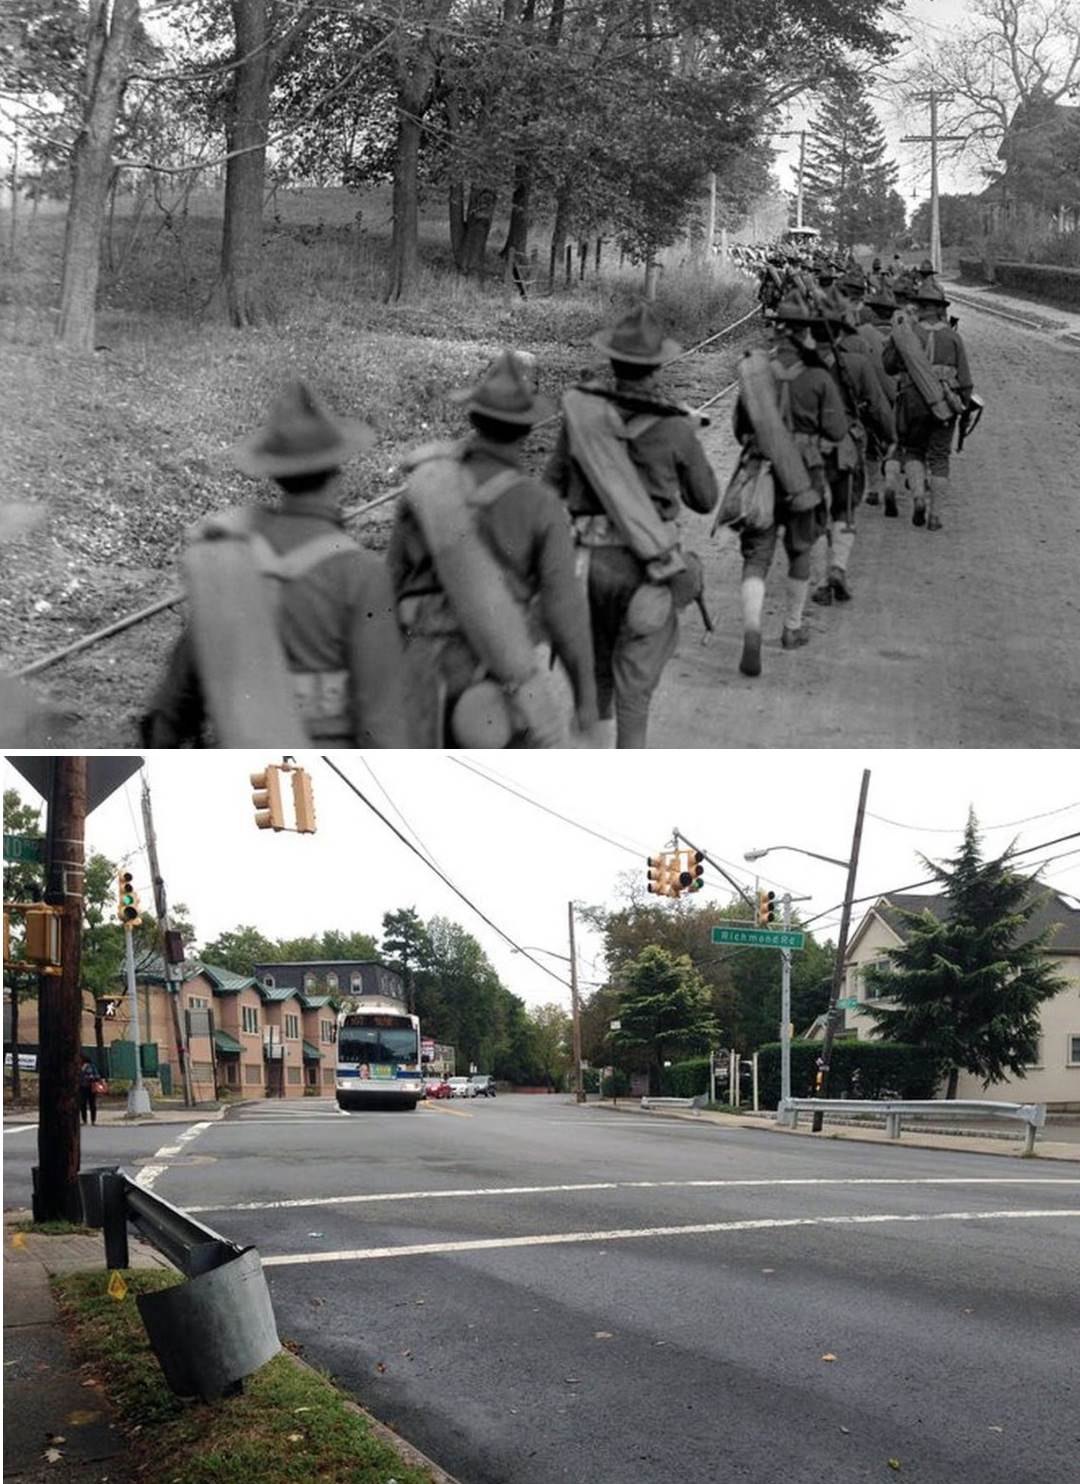 Soldiers March On Amboy Road Near Richmond Road In New Dorp, Captured On October 26, 1912. Second Photo Is From 2019